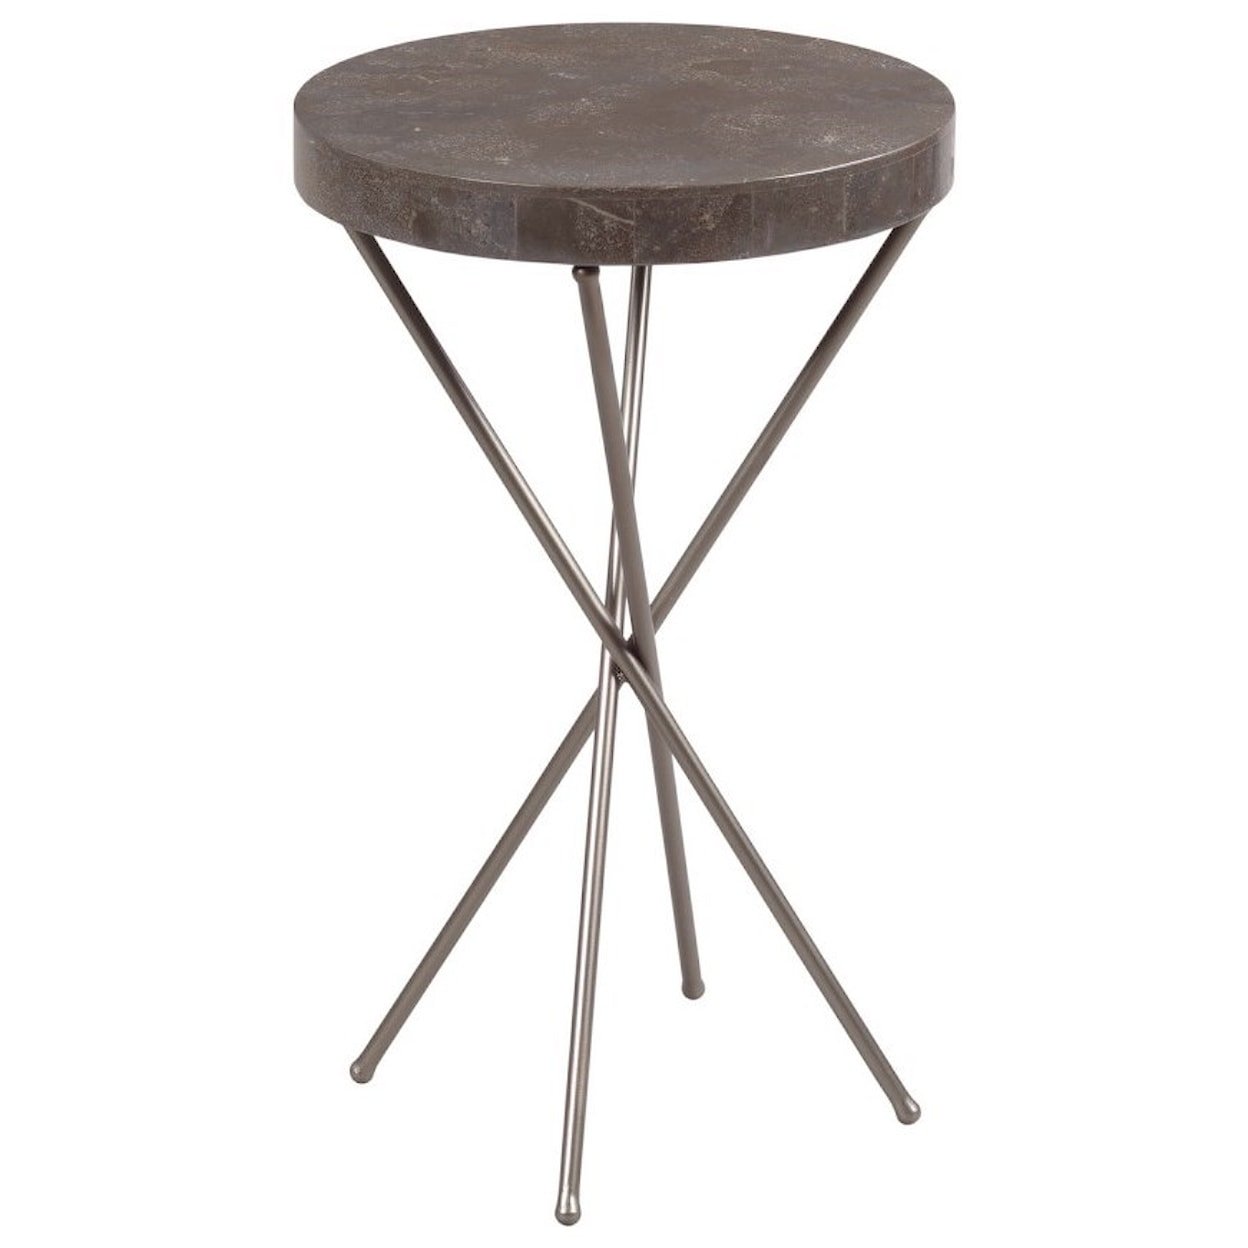 Hammary West End Round Chairside Table